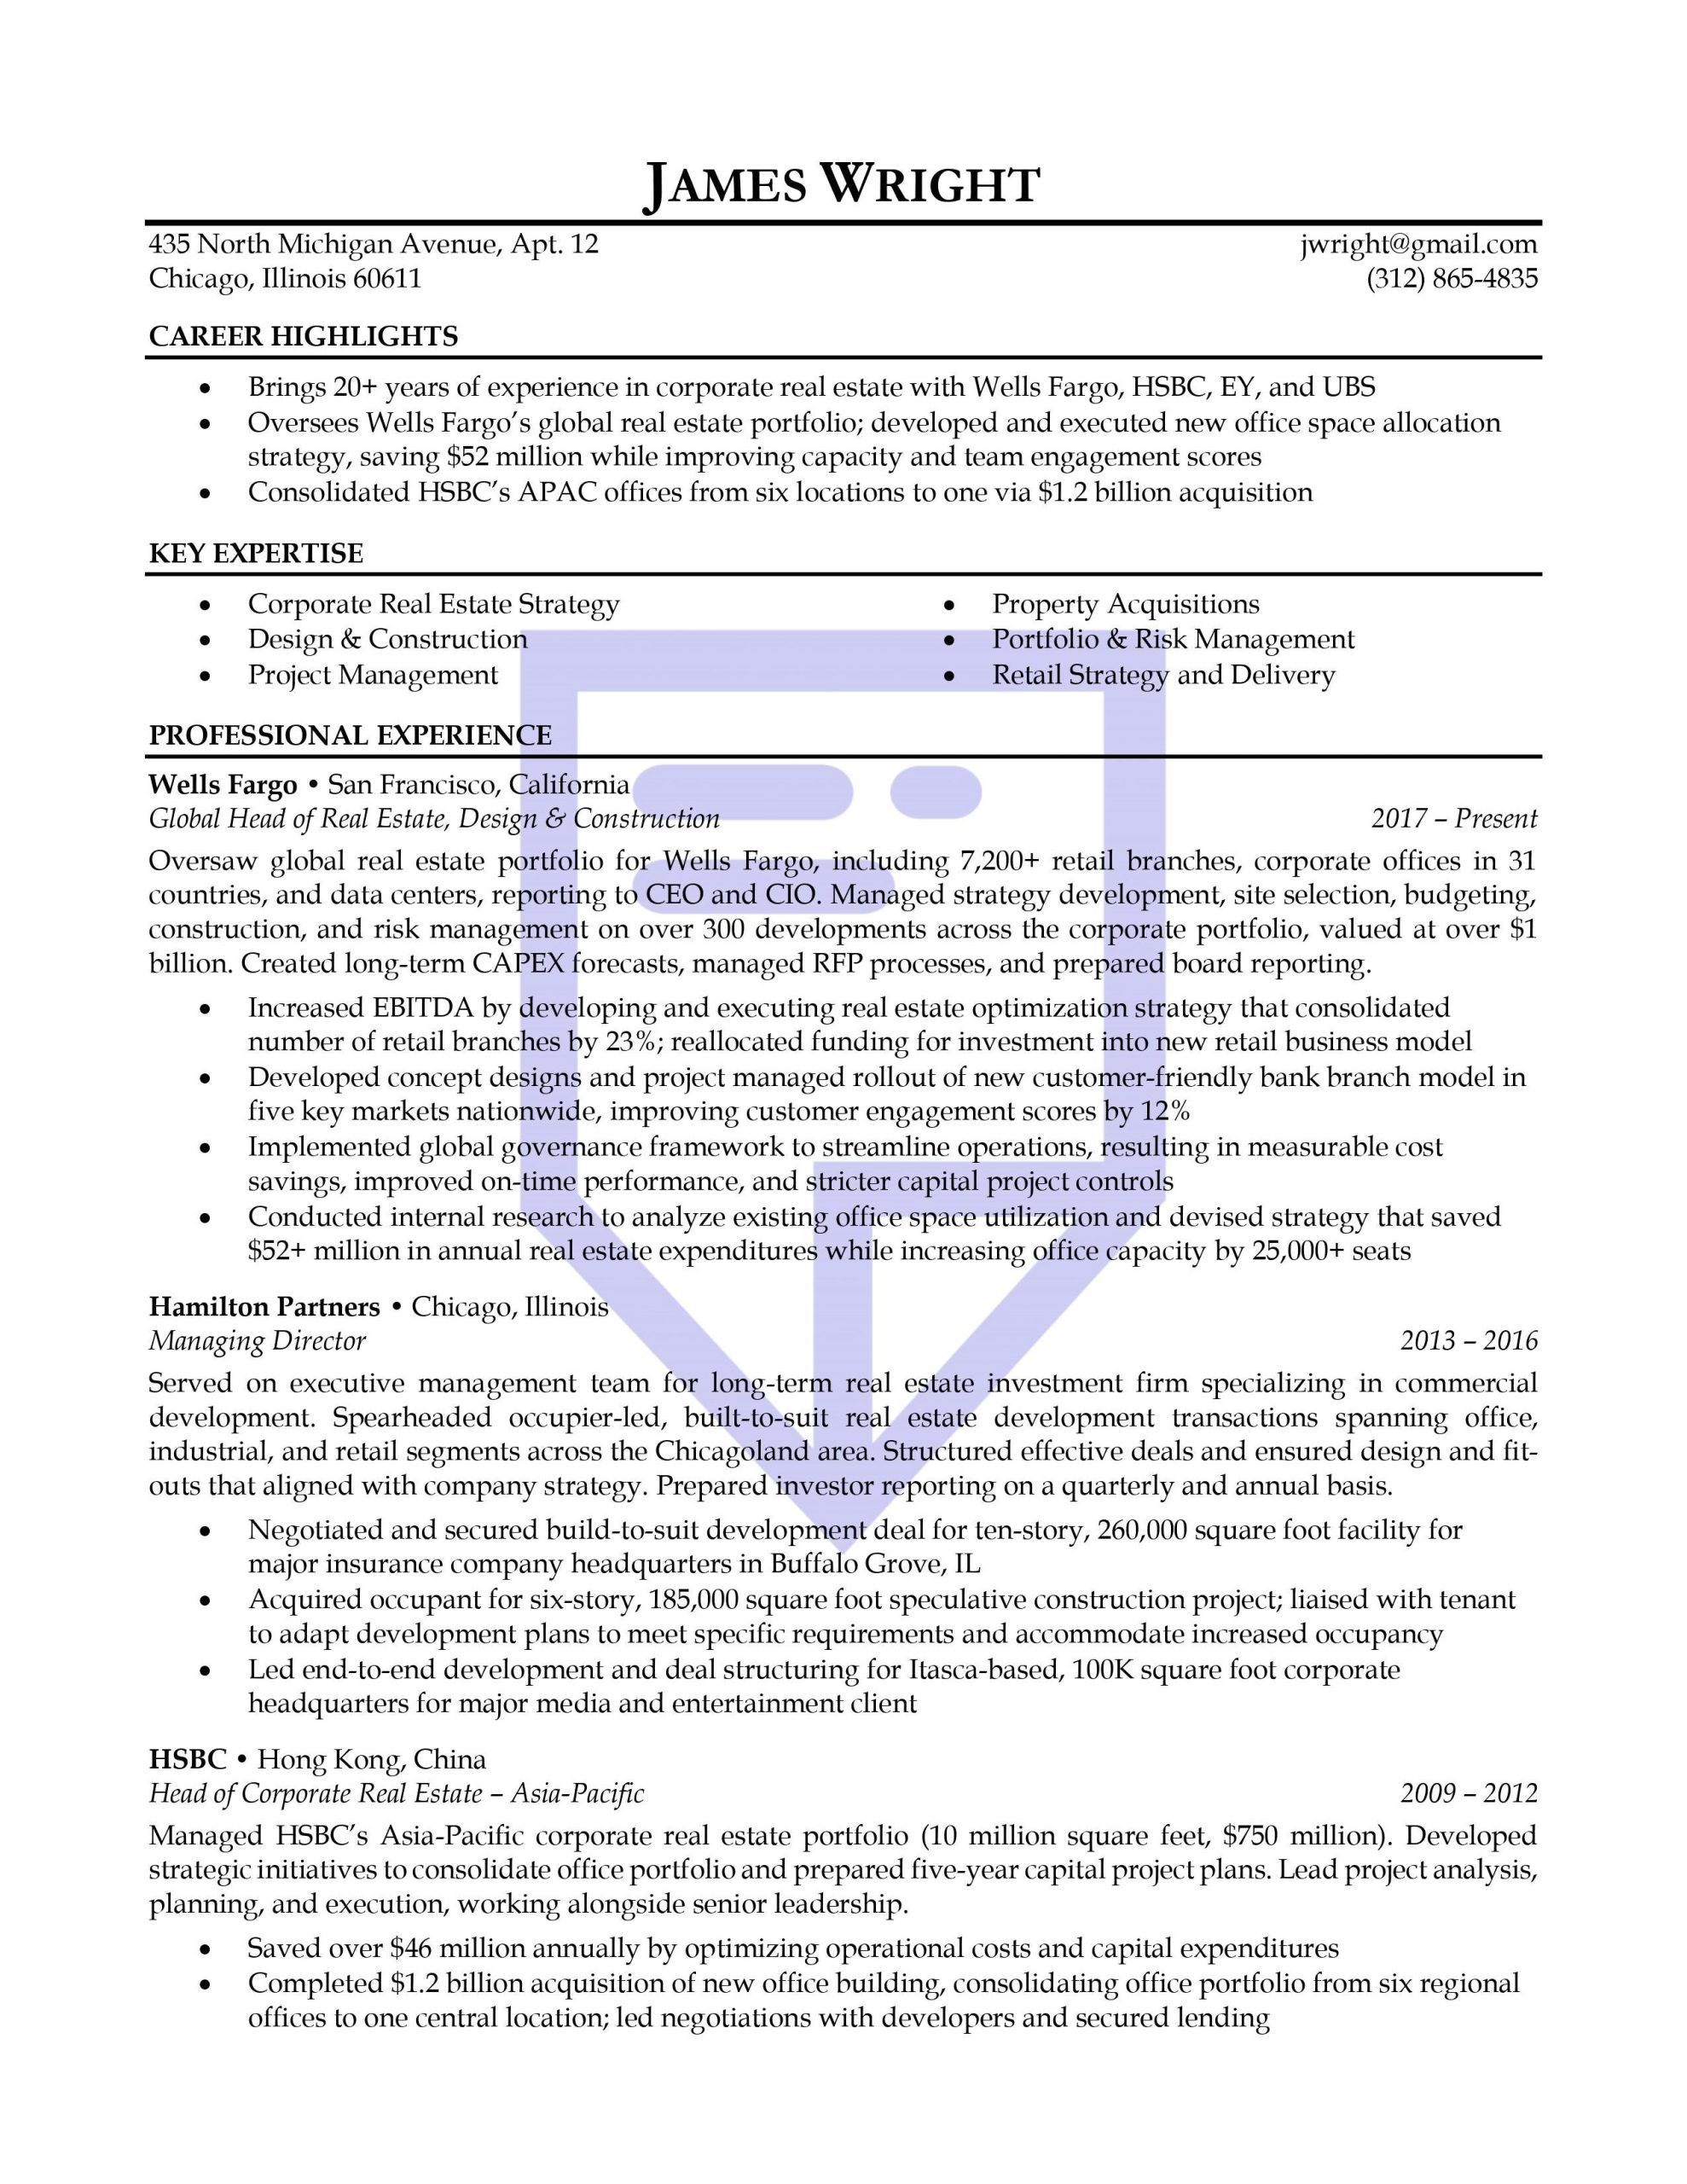 Real Estate Office Manager Sample Resume High-impact Real Estate Executive Resume Sample â Resume Pilots